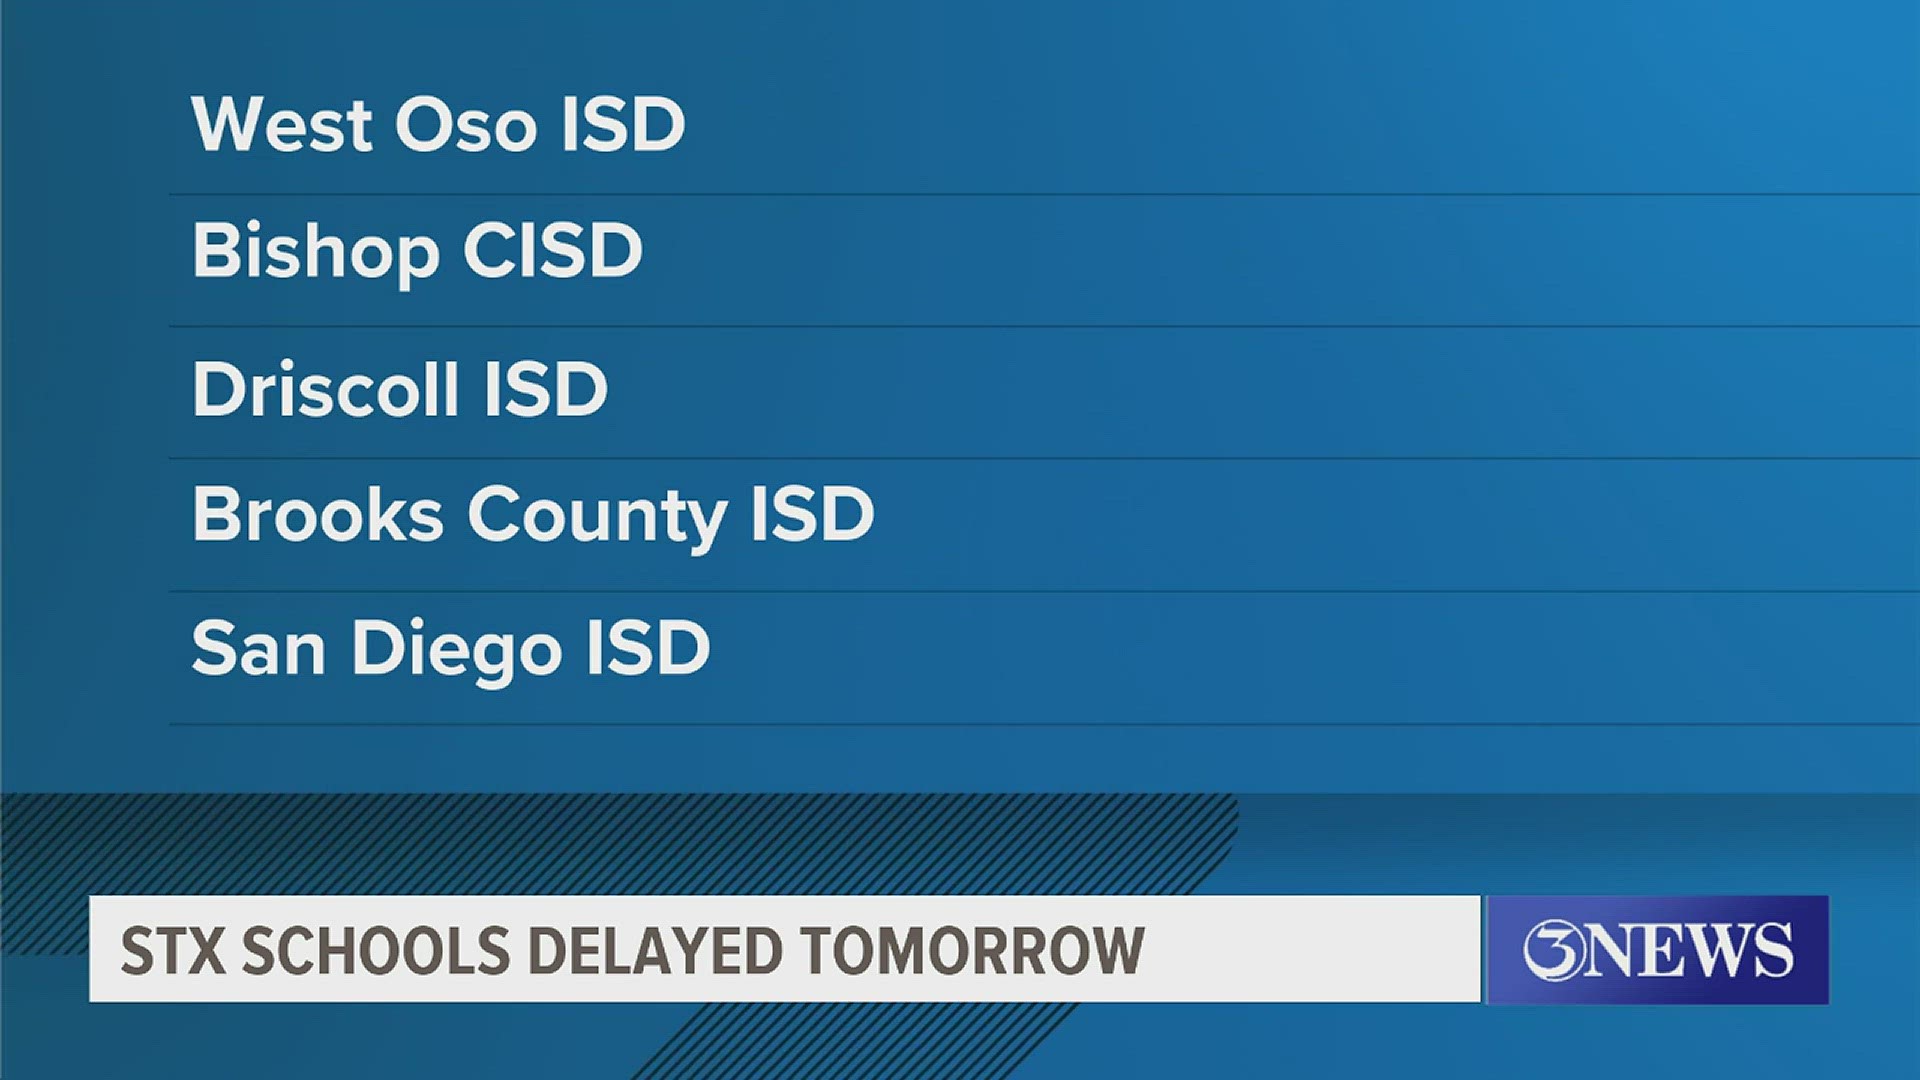 We have a full list of schools with schedule changes on our website at kiiitv.com.